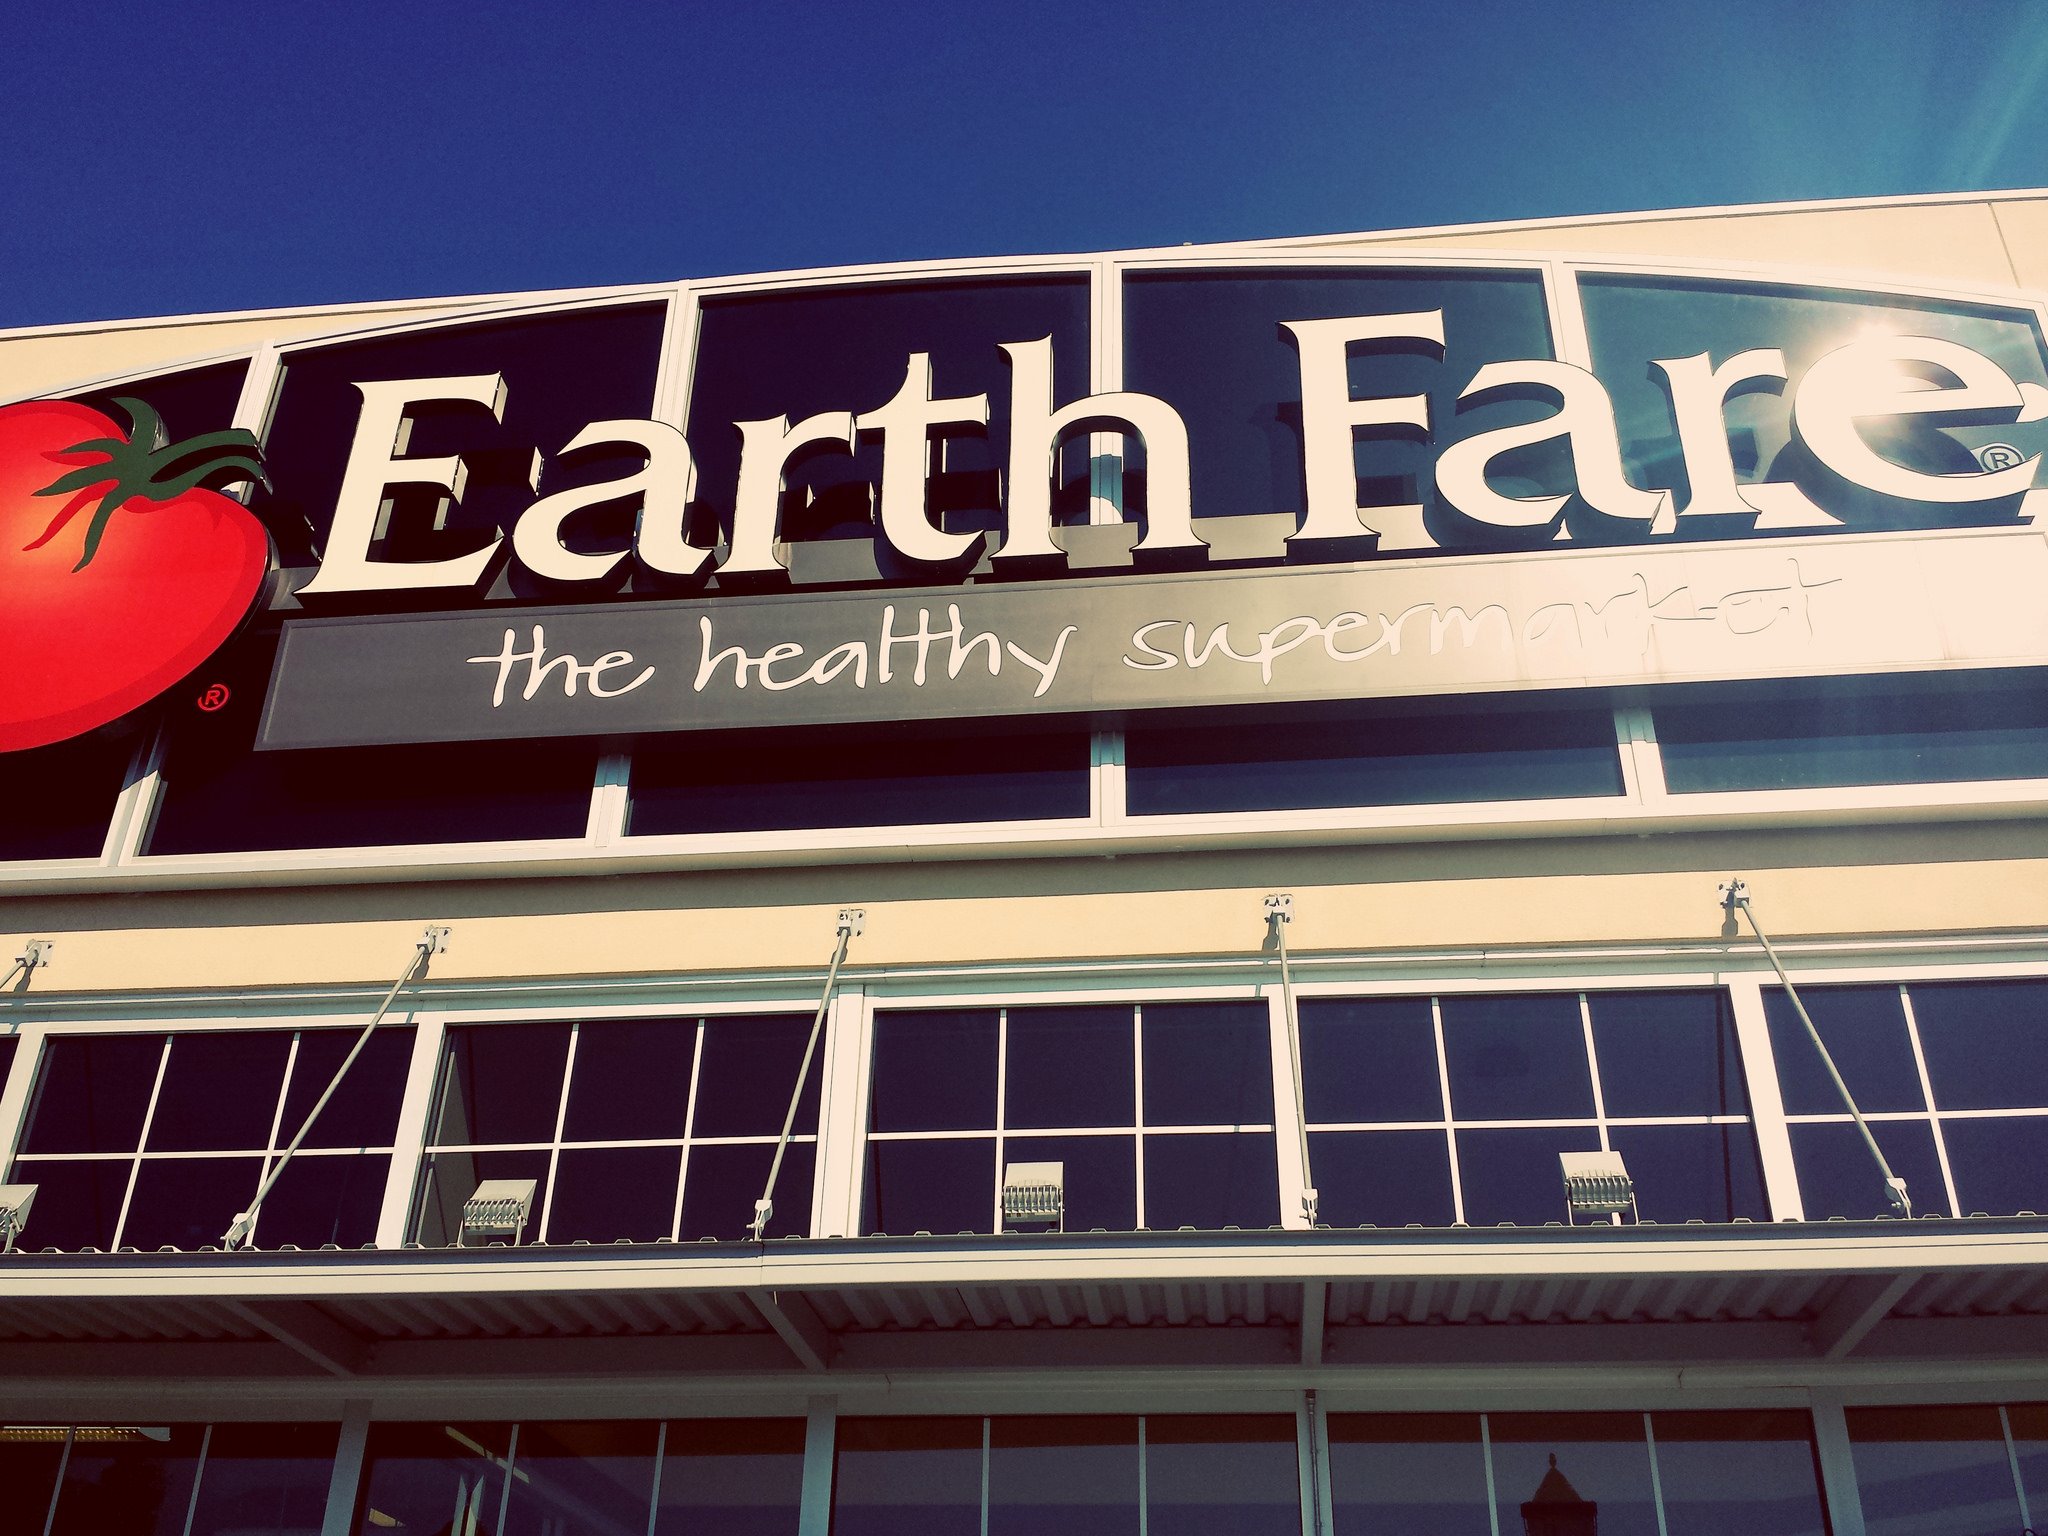 Earth Fare grocery chain uses union busting tactics against workers. Photo: frankieleon (CC BY 2.0)